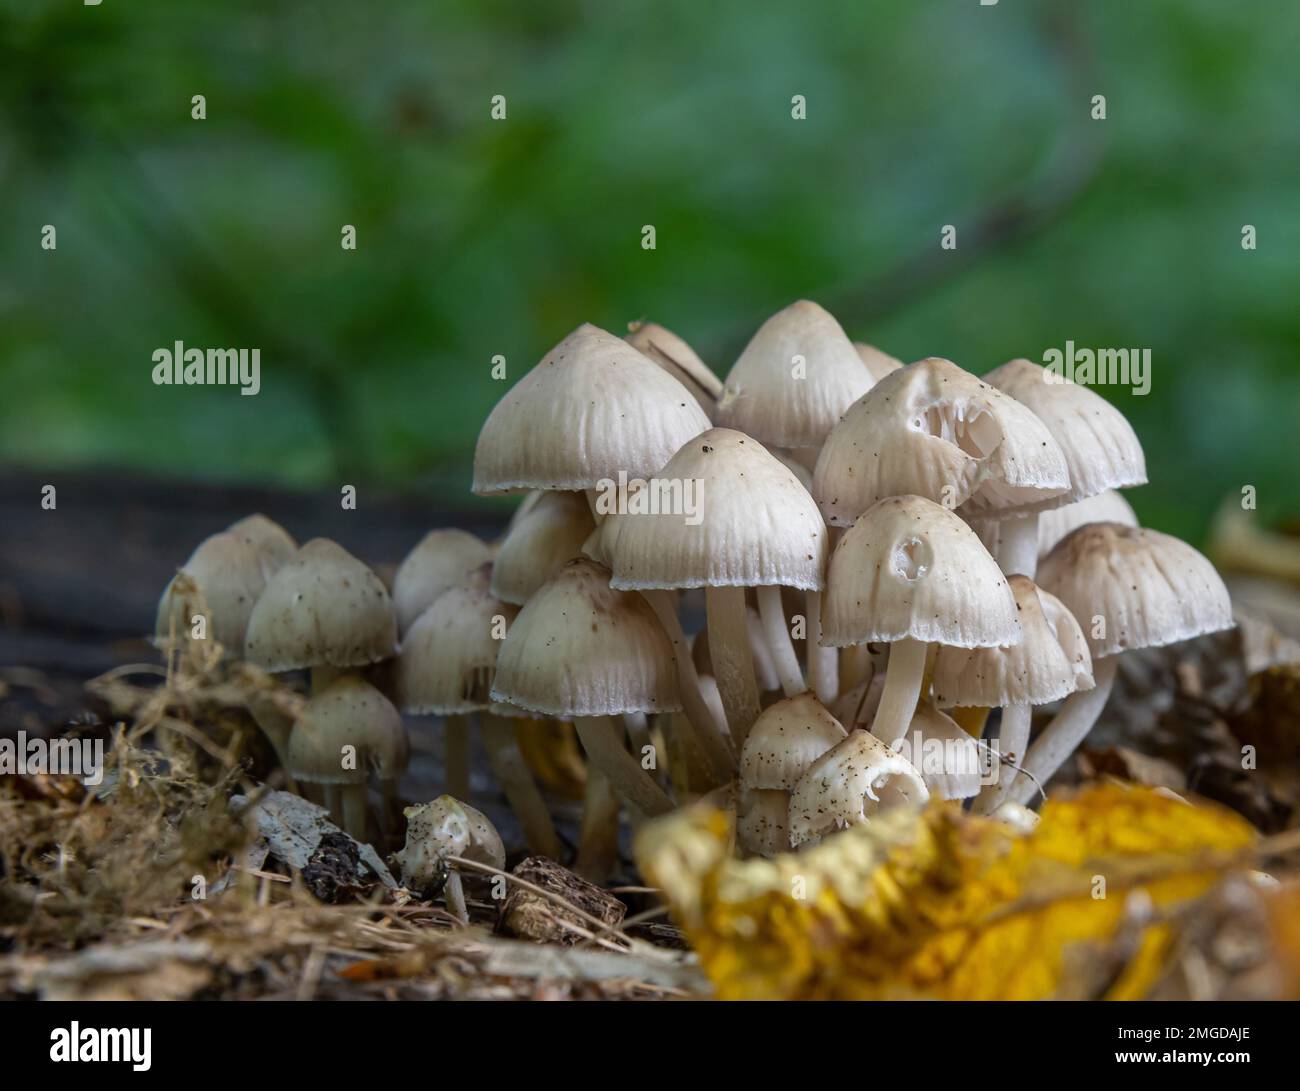 Forest mushrooms in the grass. Gathering mushrooms growing on an old tree stump in the forest. Stock Photo